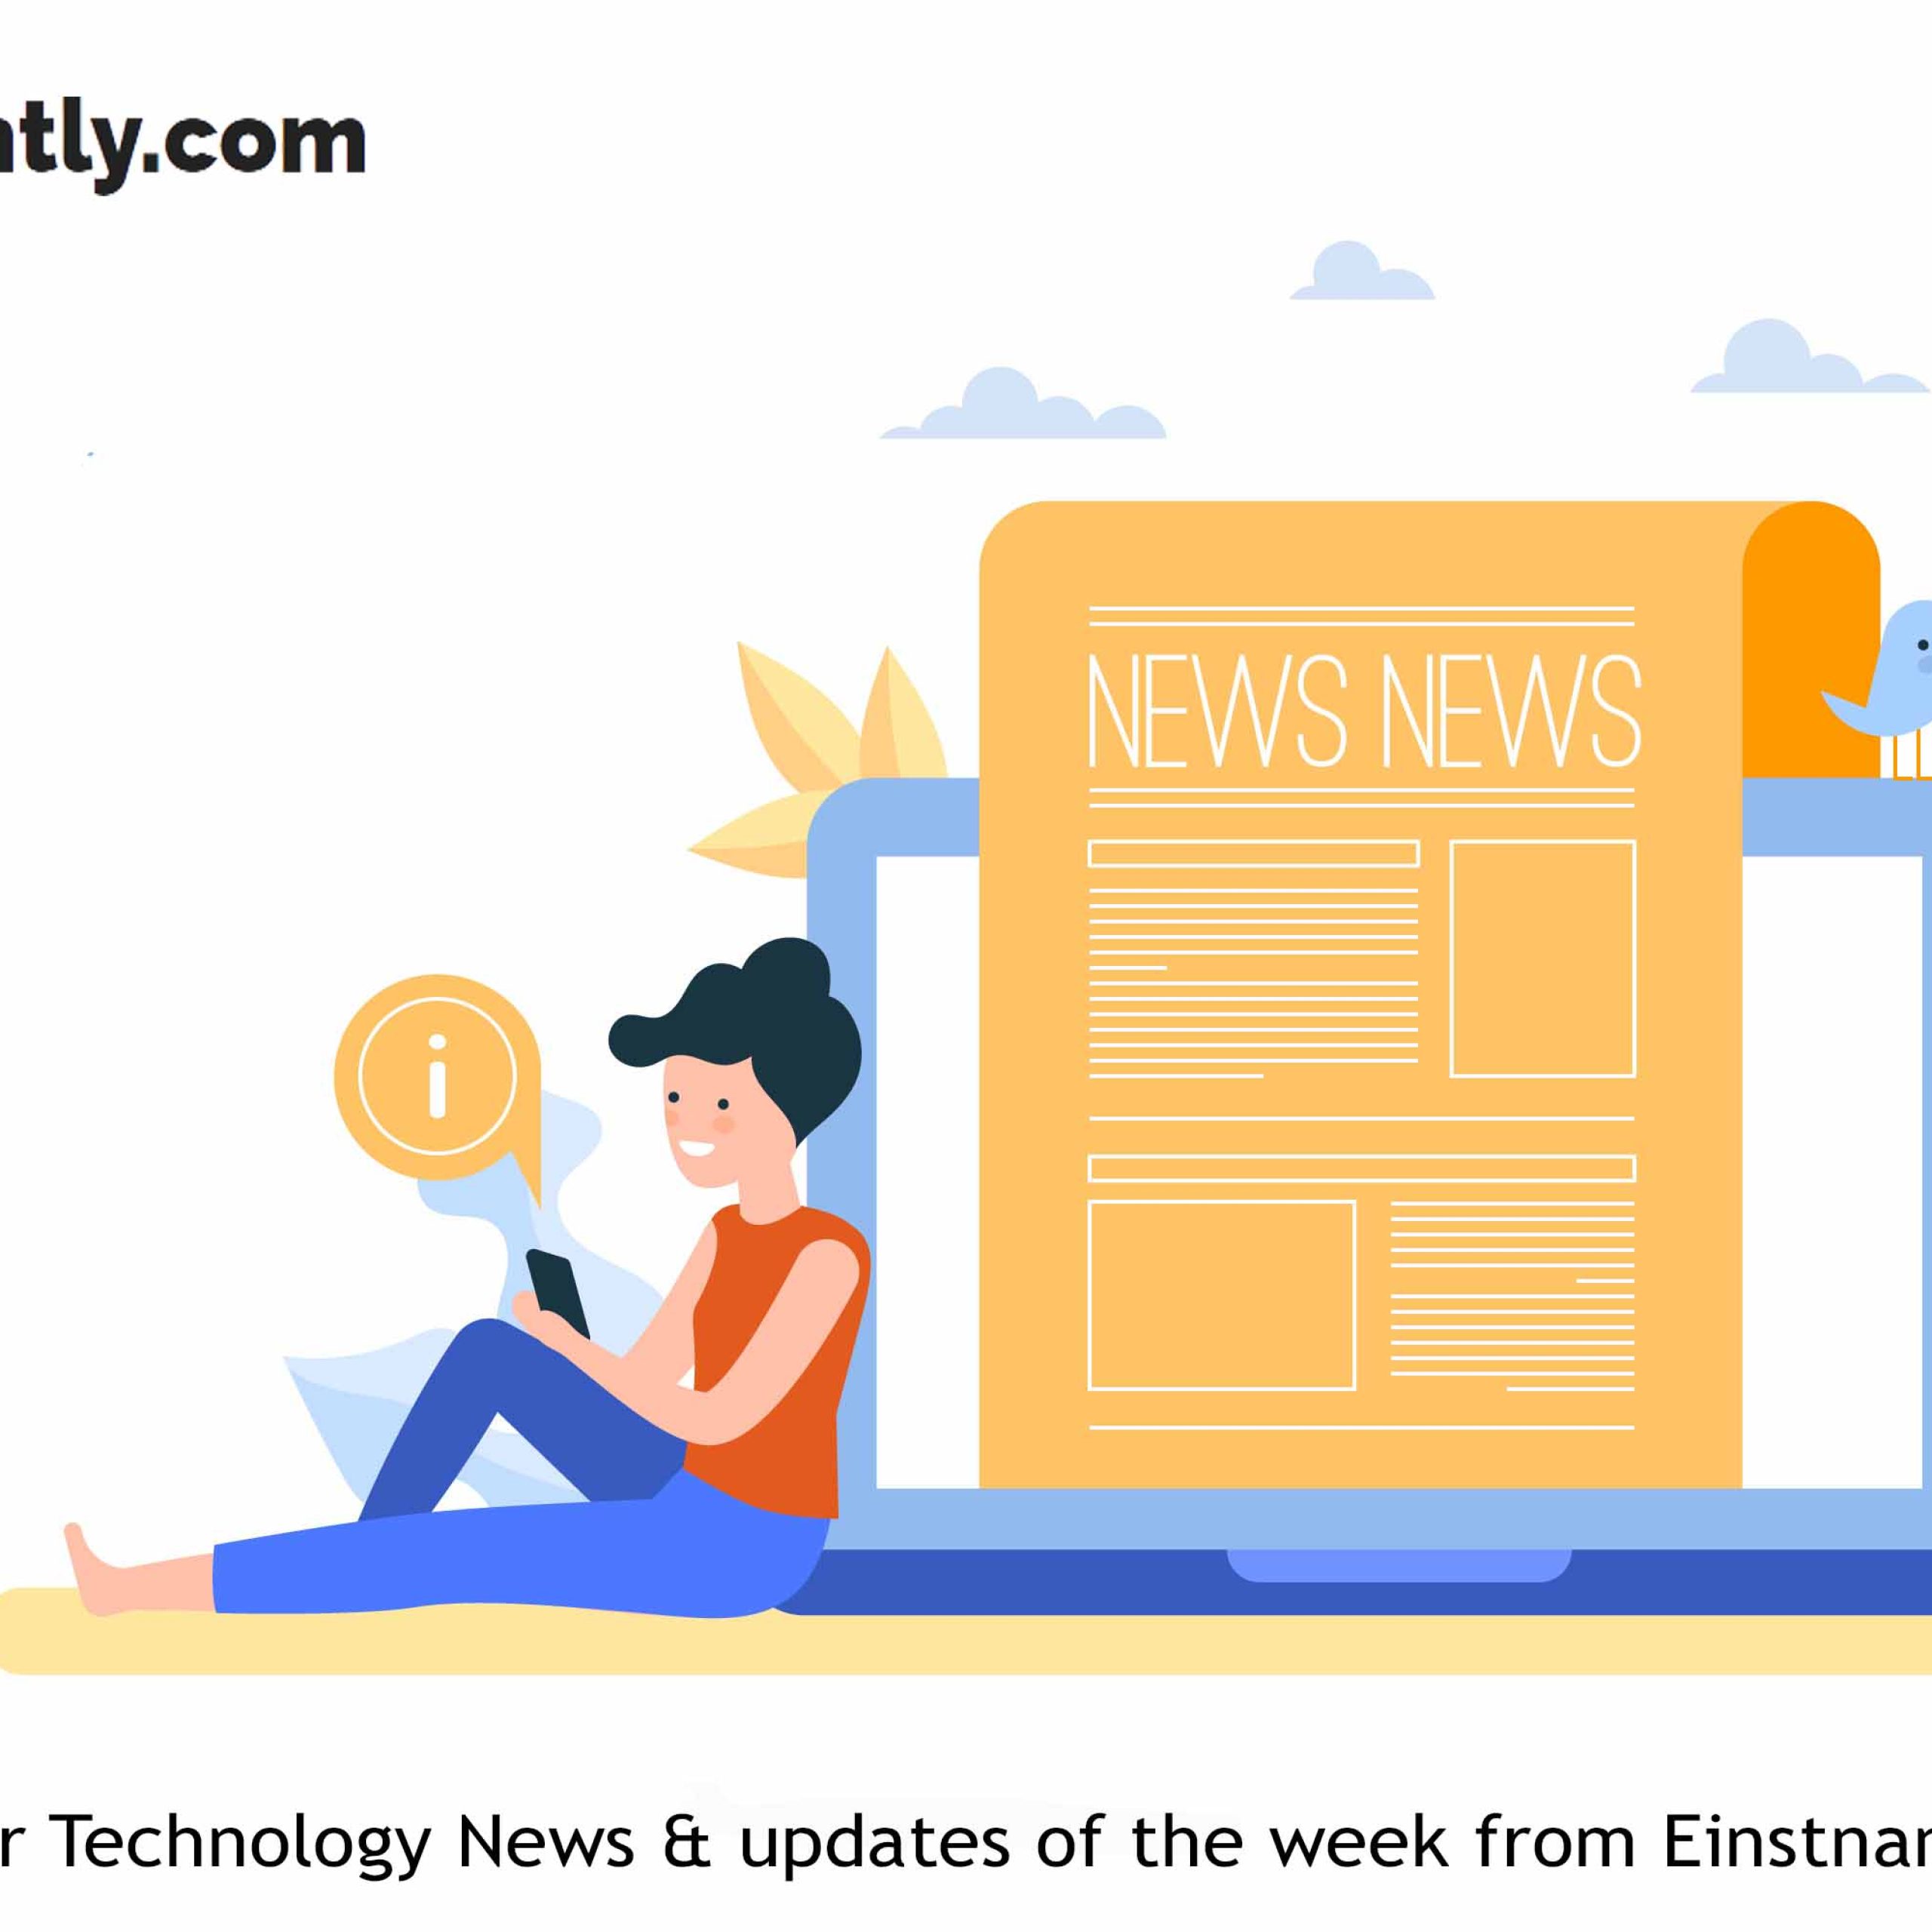 Major Technology News & updates of the week from Einstantly.com